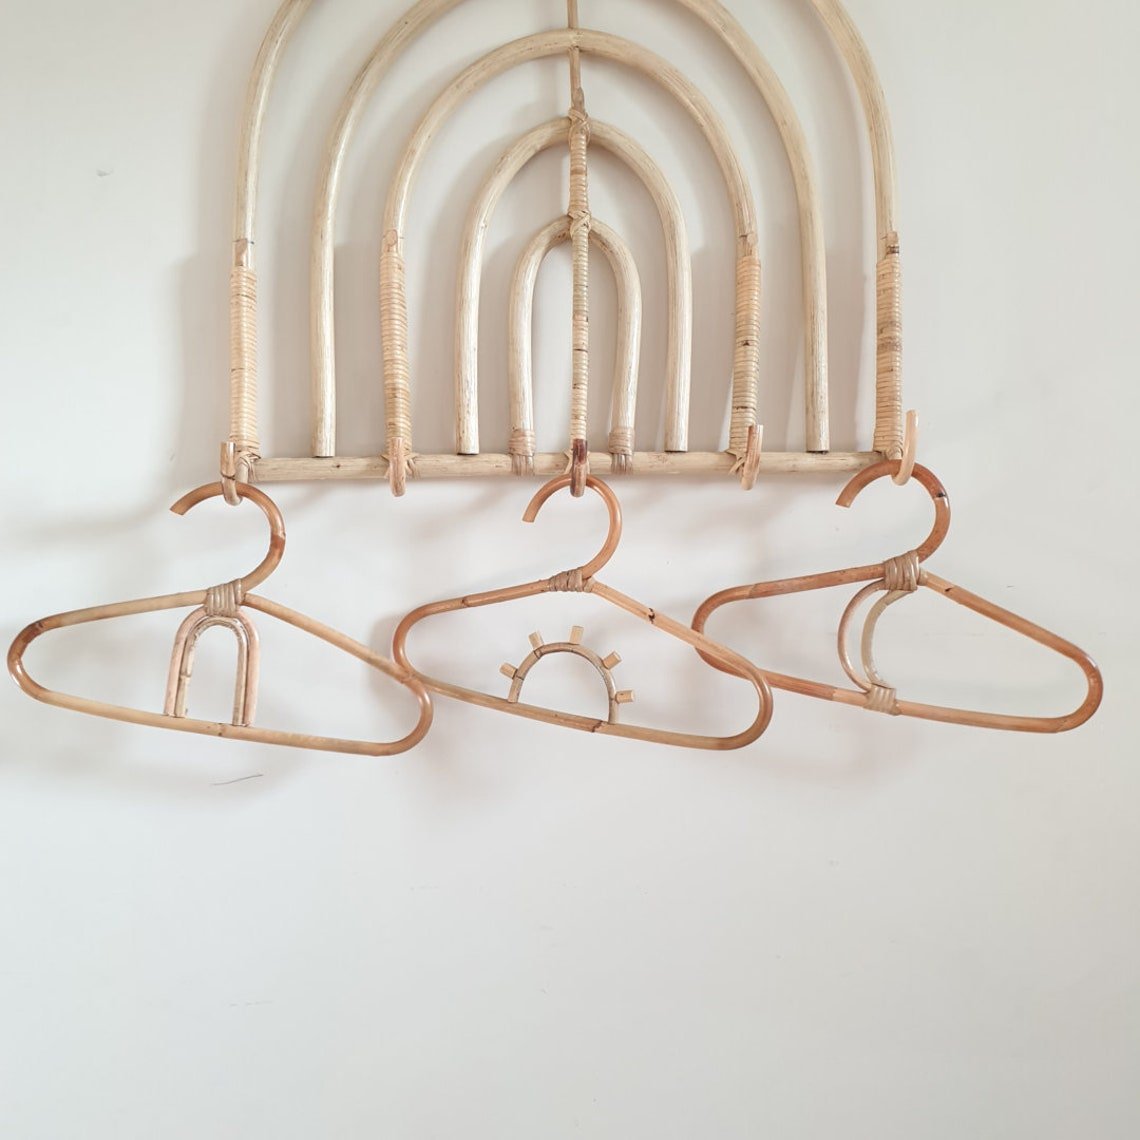 Baby Clothes Hanger Kids Rattan Clothing Hangers Natural Handcrafted Wholesale Competitive Price